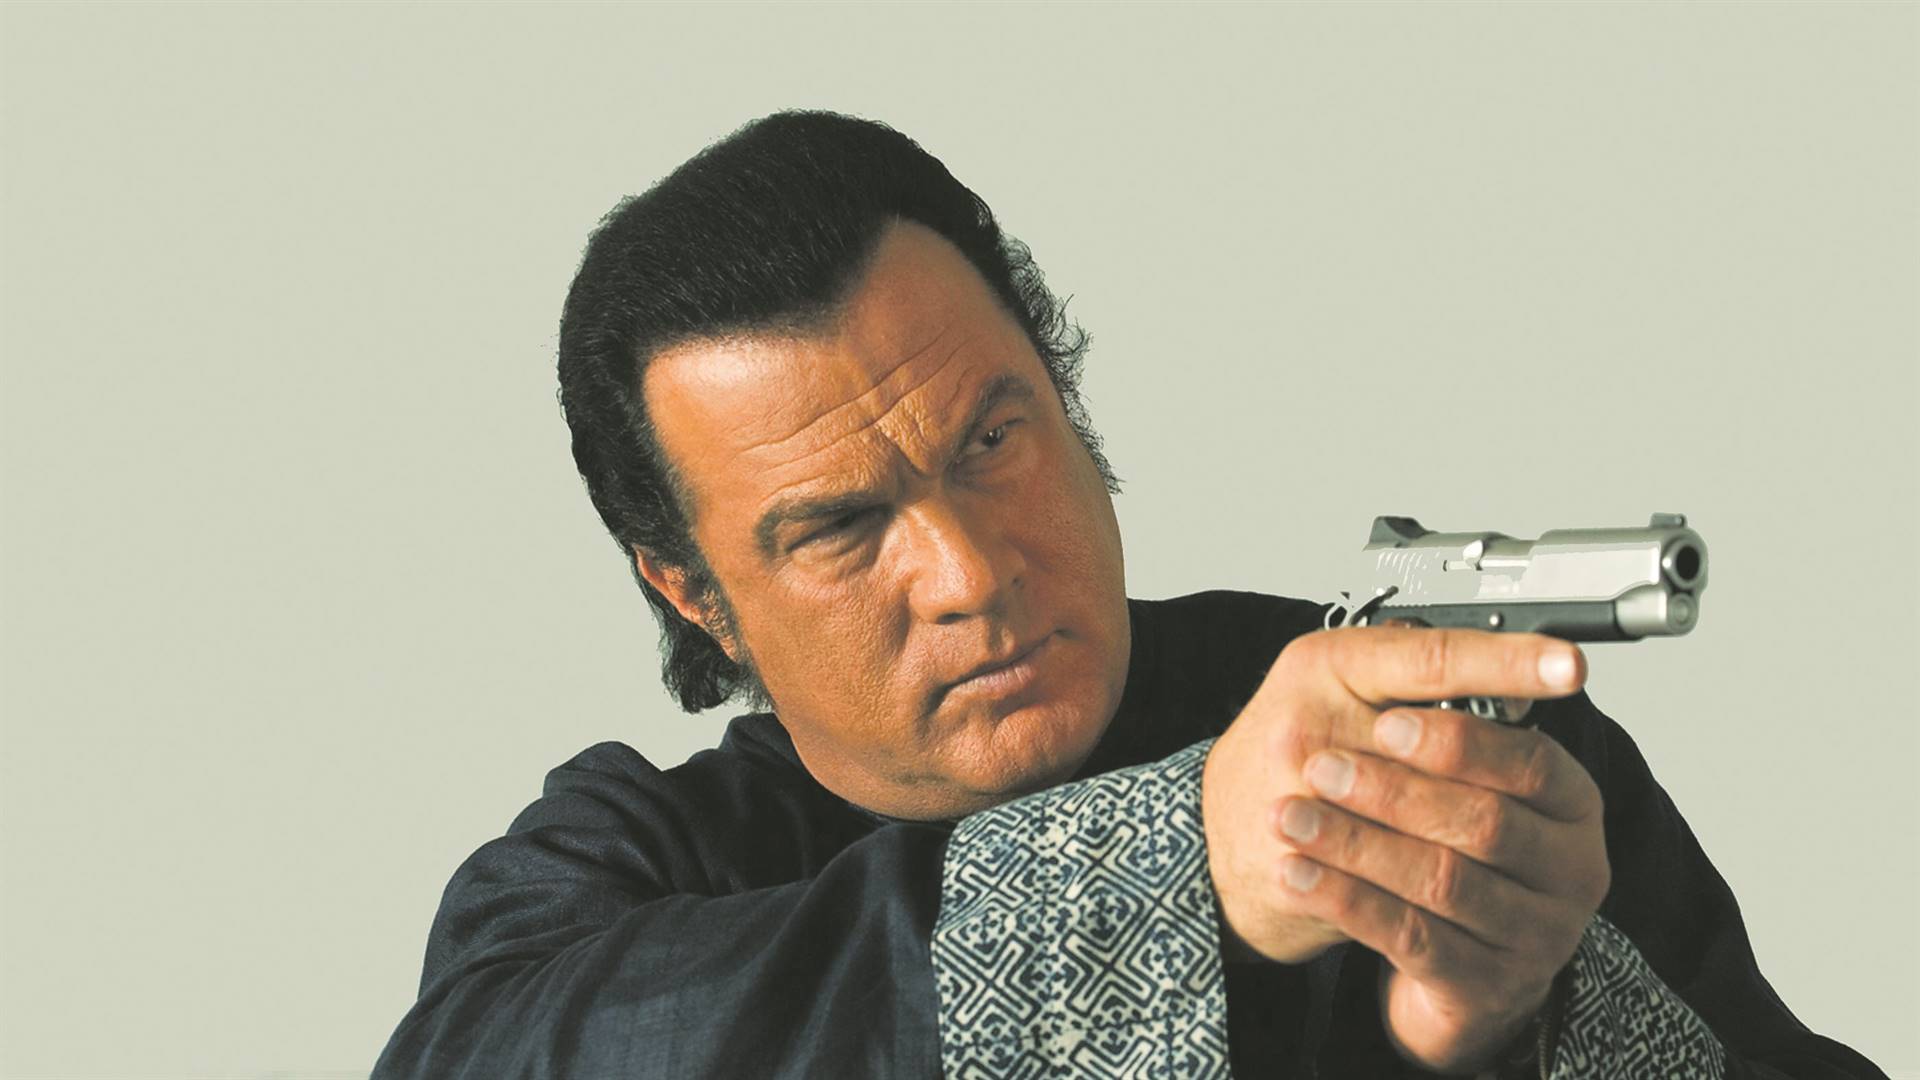 Seagal, who now lives in Moscow, hasn't responded to the SEC's repeated demands after making his initial payment, according to the commission. 